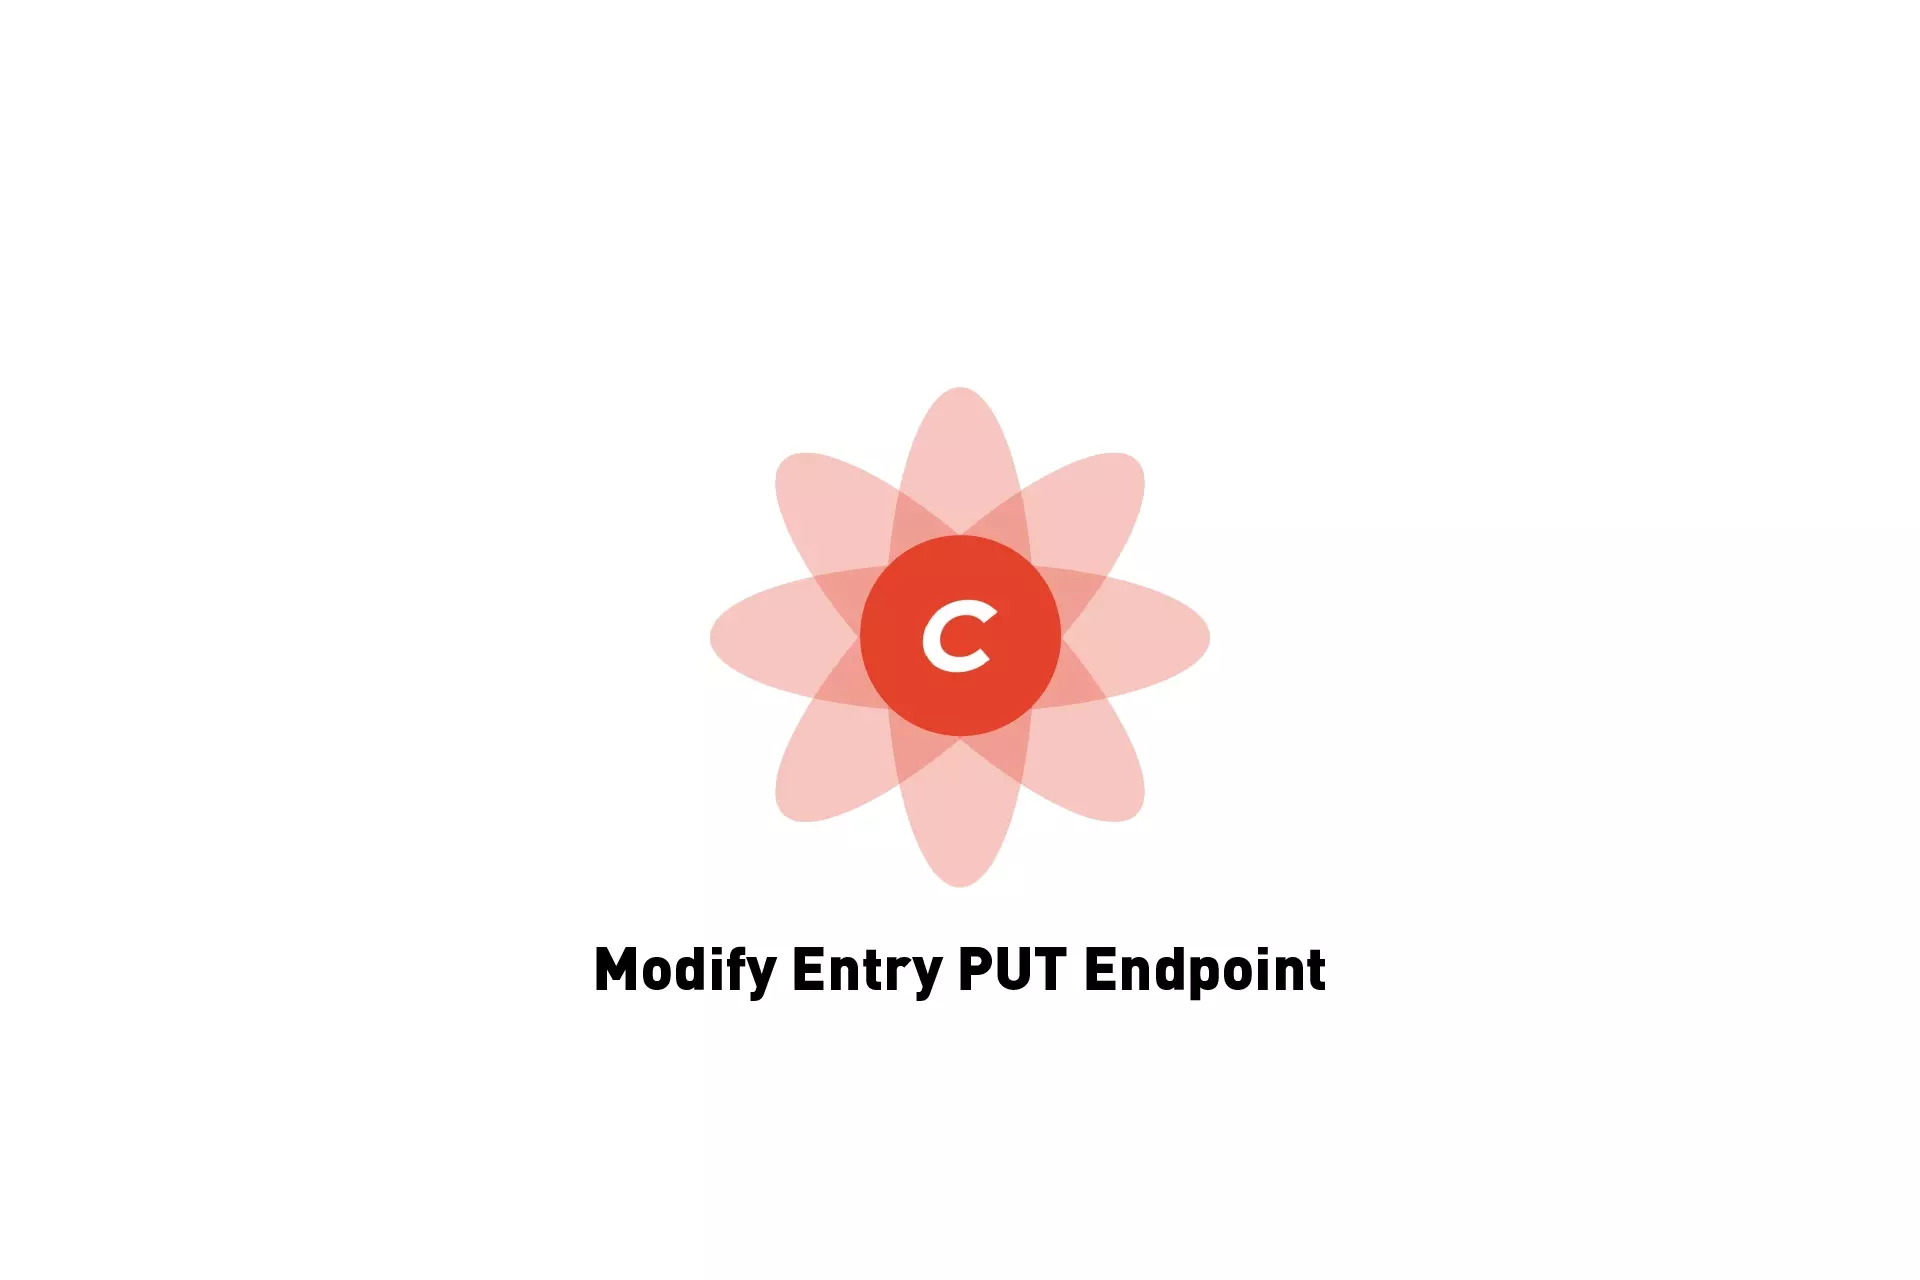 A flower that represents Craft CMS, beneath it sits the text "Modify Entry PUT Endpoint."